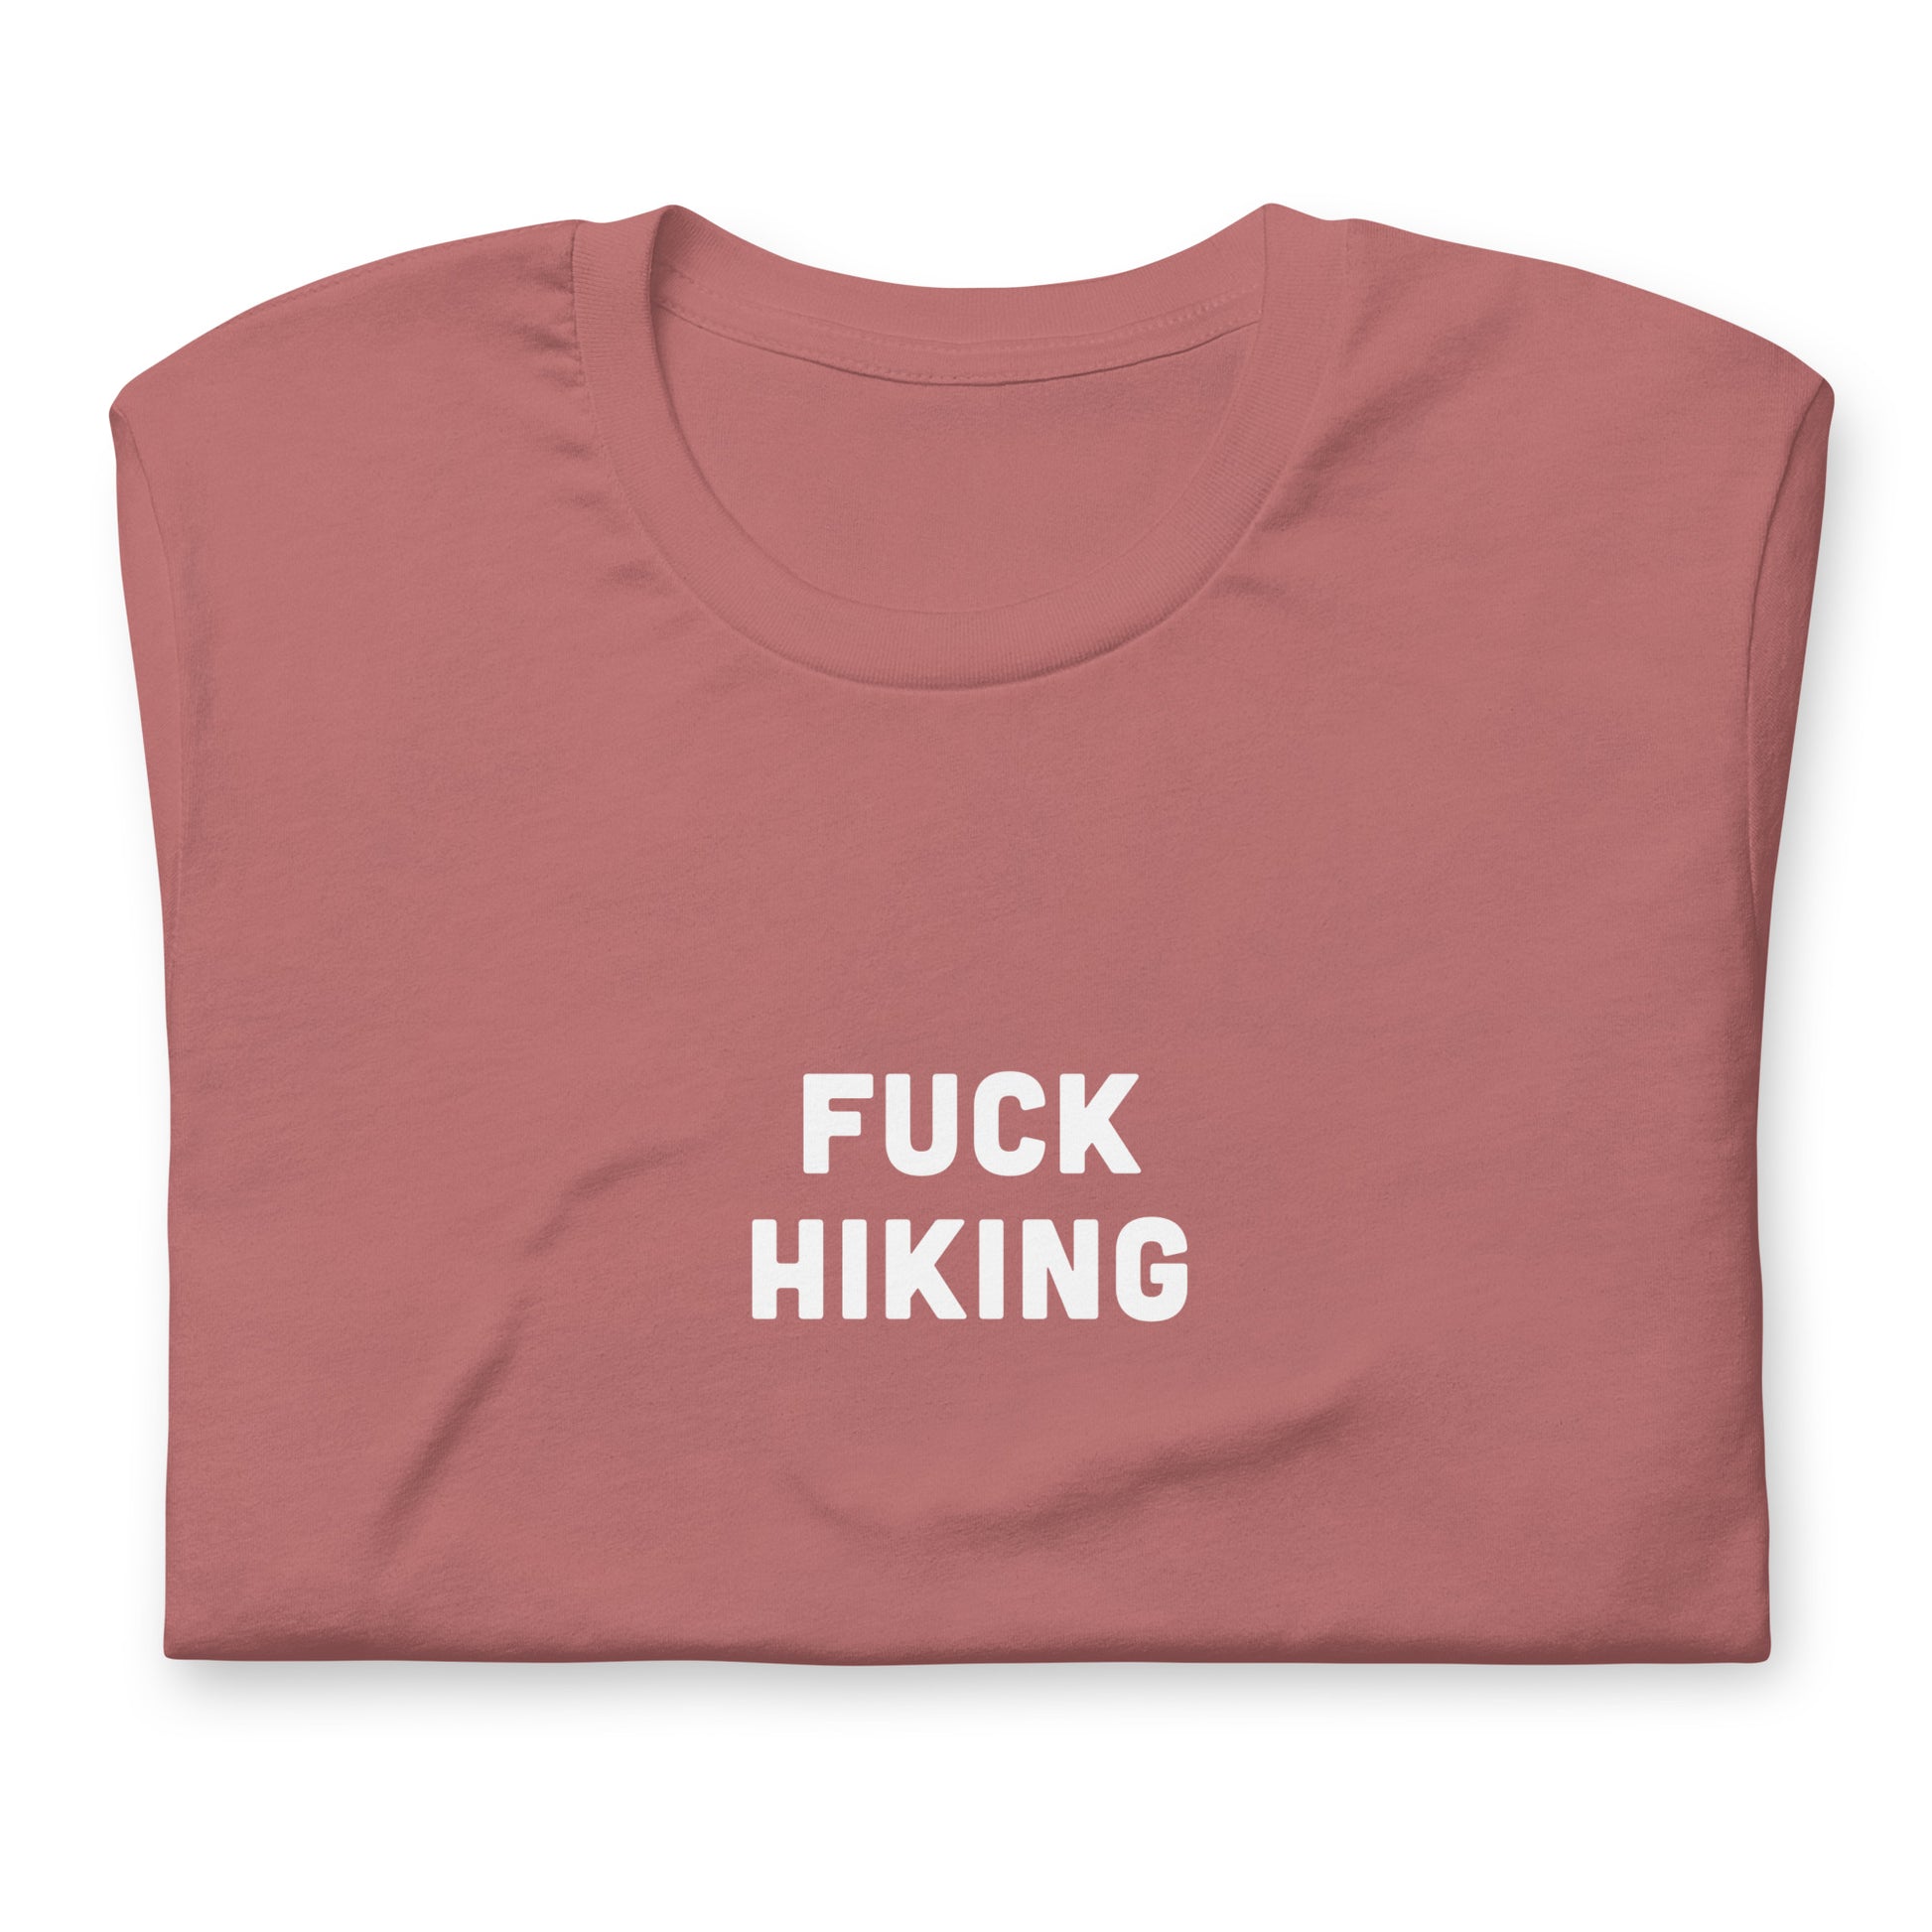 Fuck Hiking T-Shirt Size 2XL Color Navy